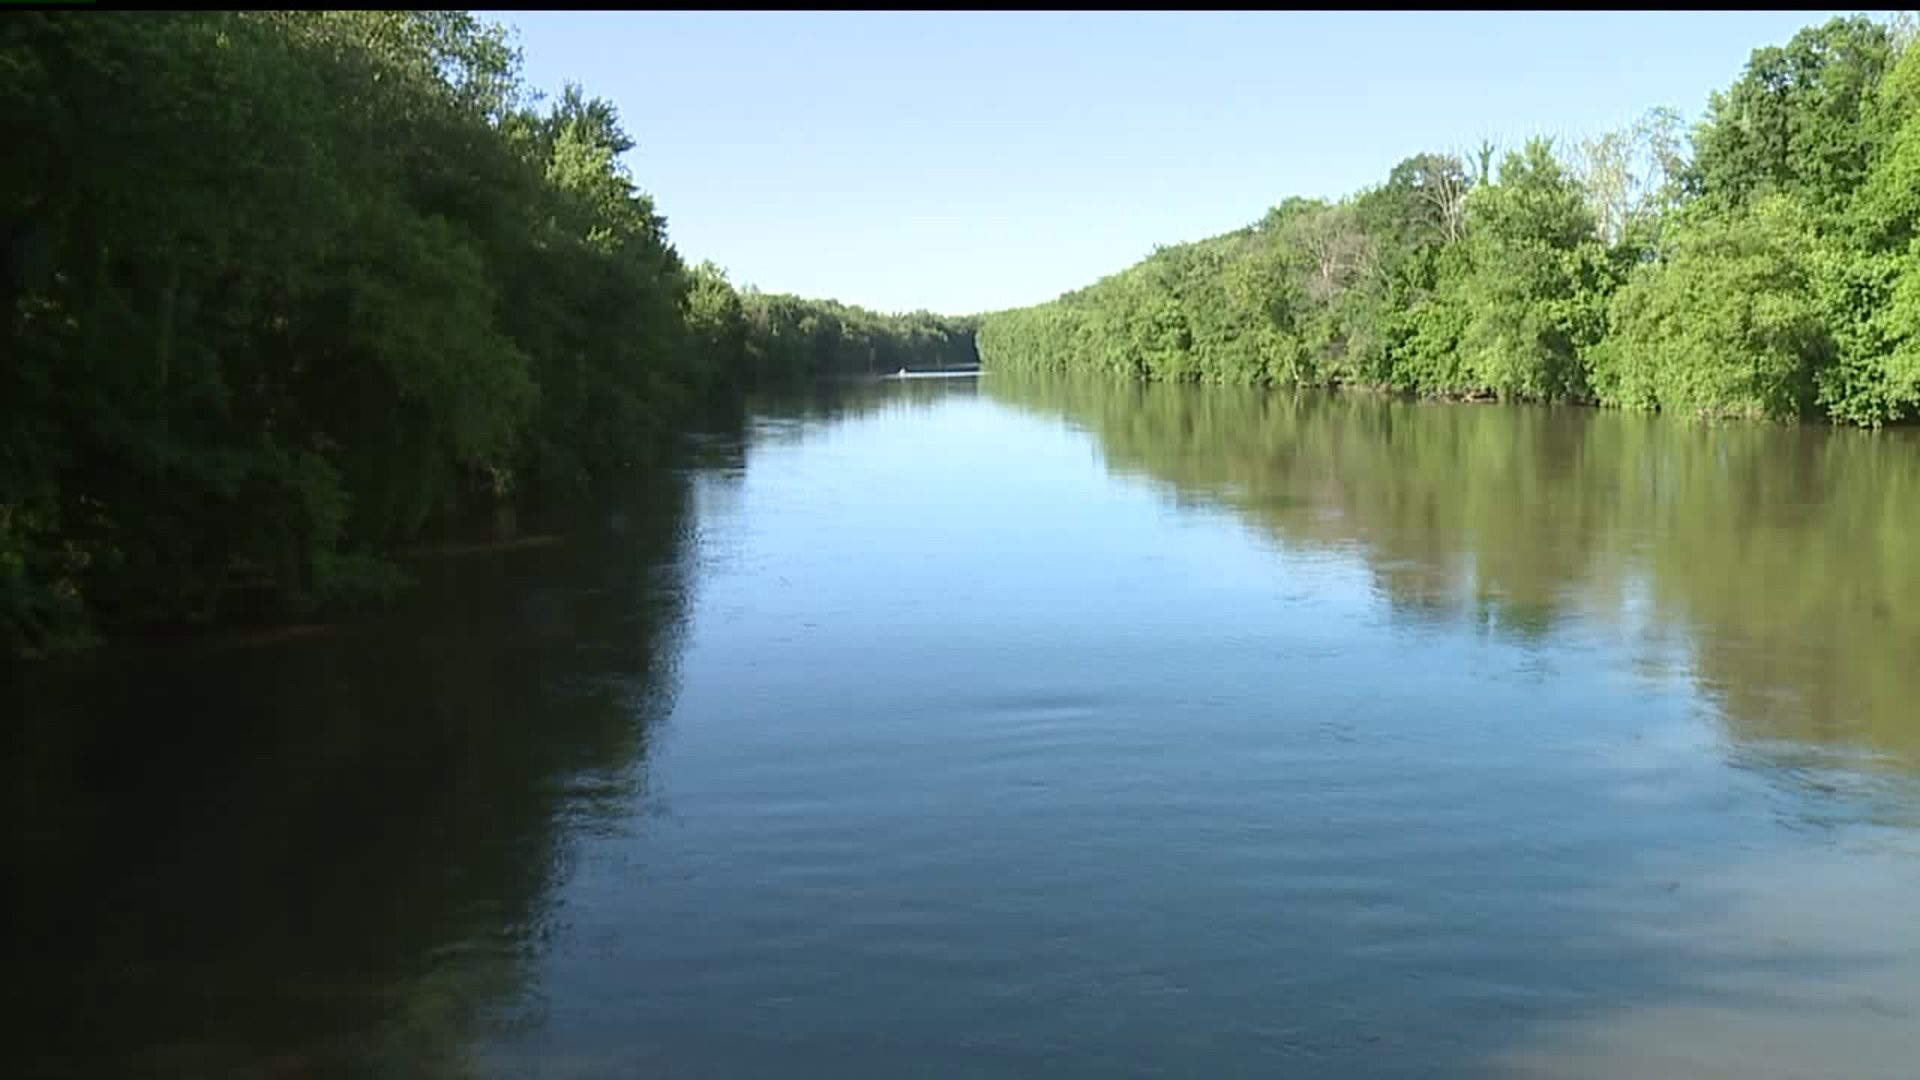 Search continues for 8-year-old boy swept away in Susquehanna River in Perry County